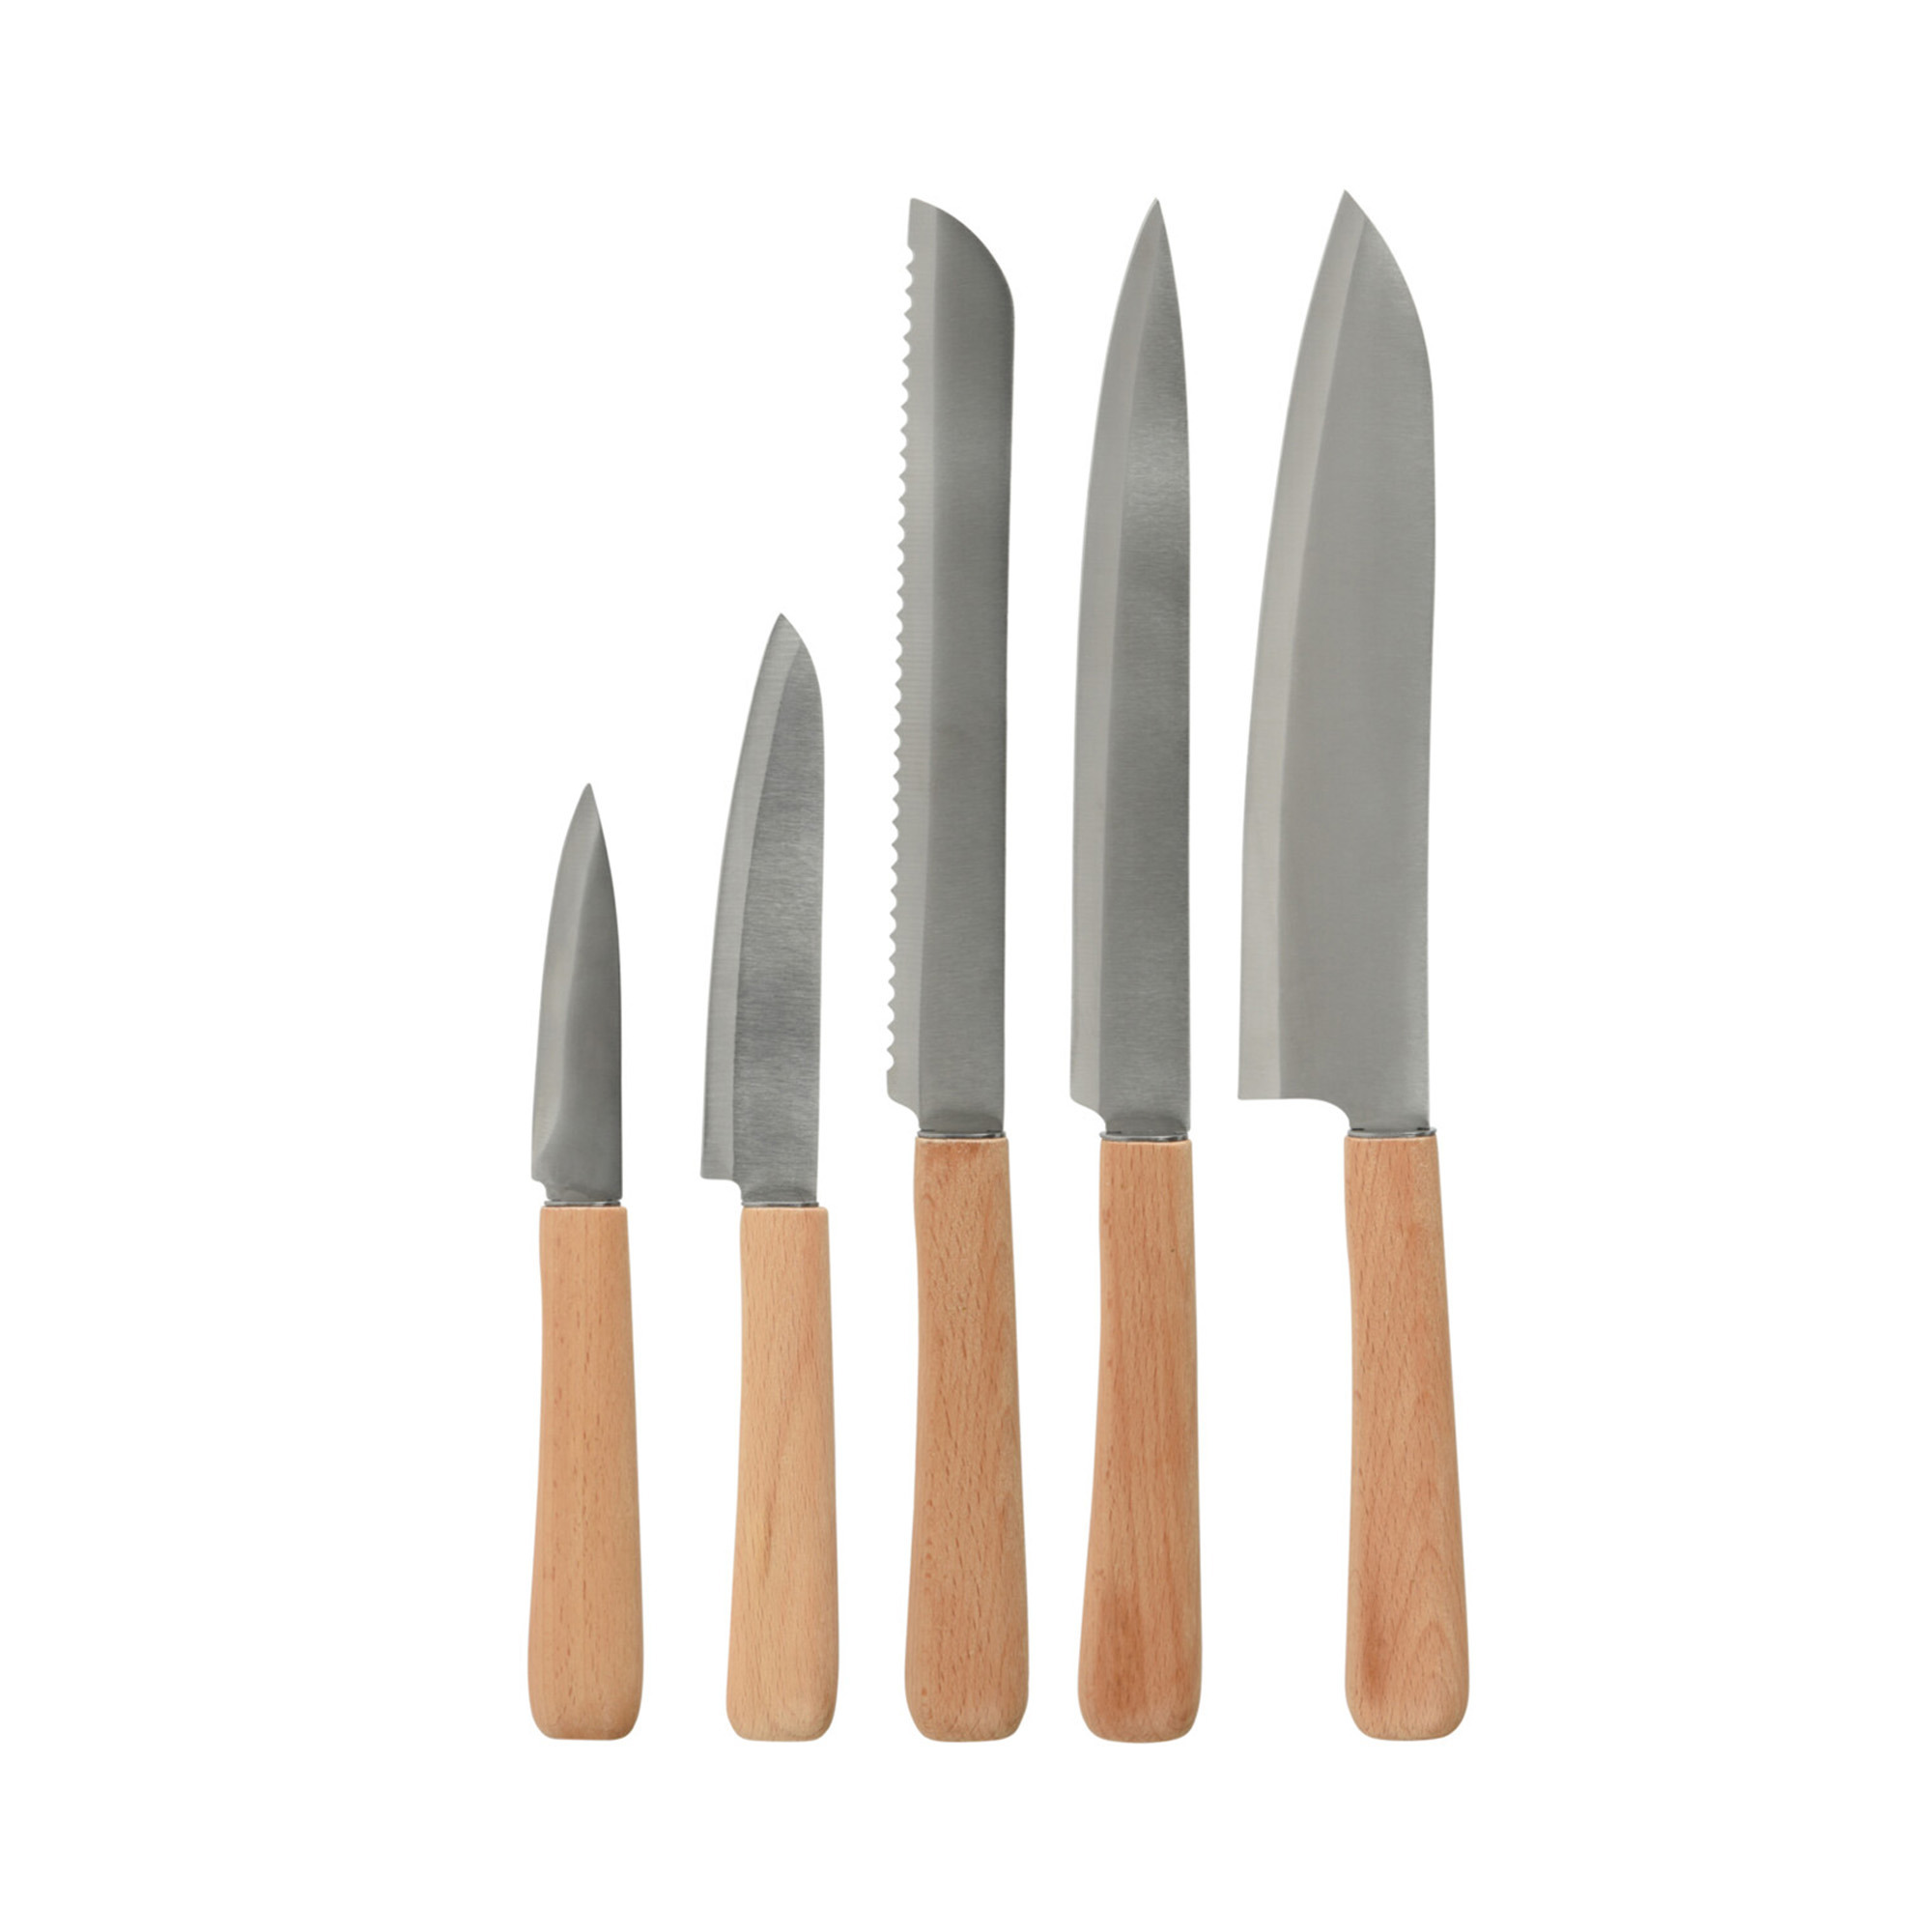 Excellent Houseware chefs messenset 5 delig Staal-Hout